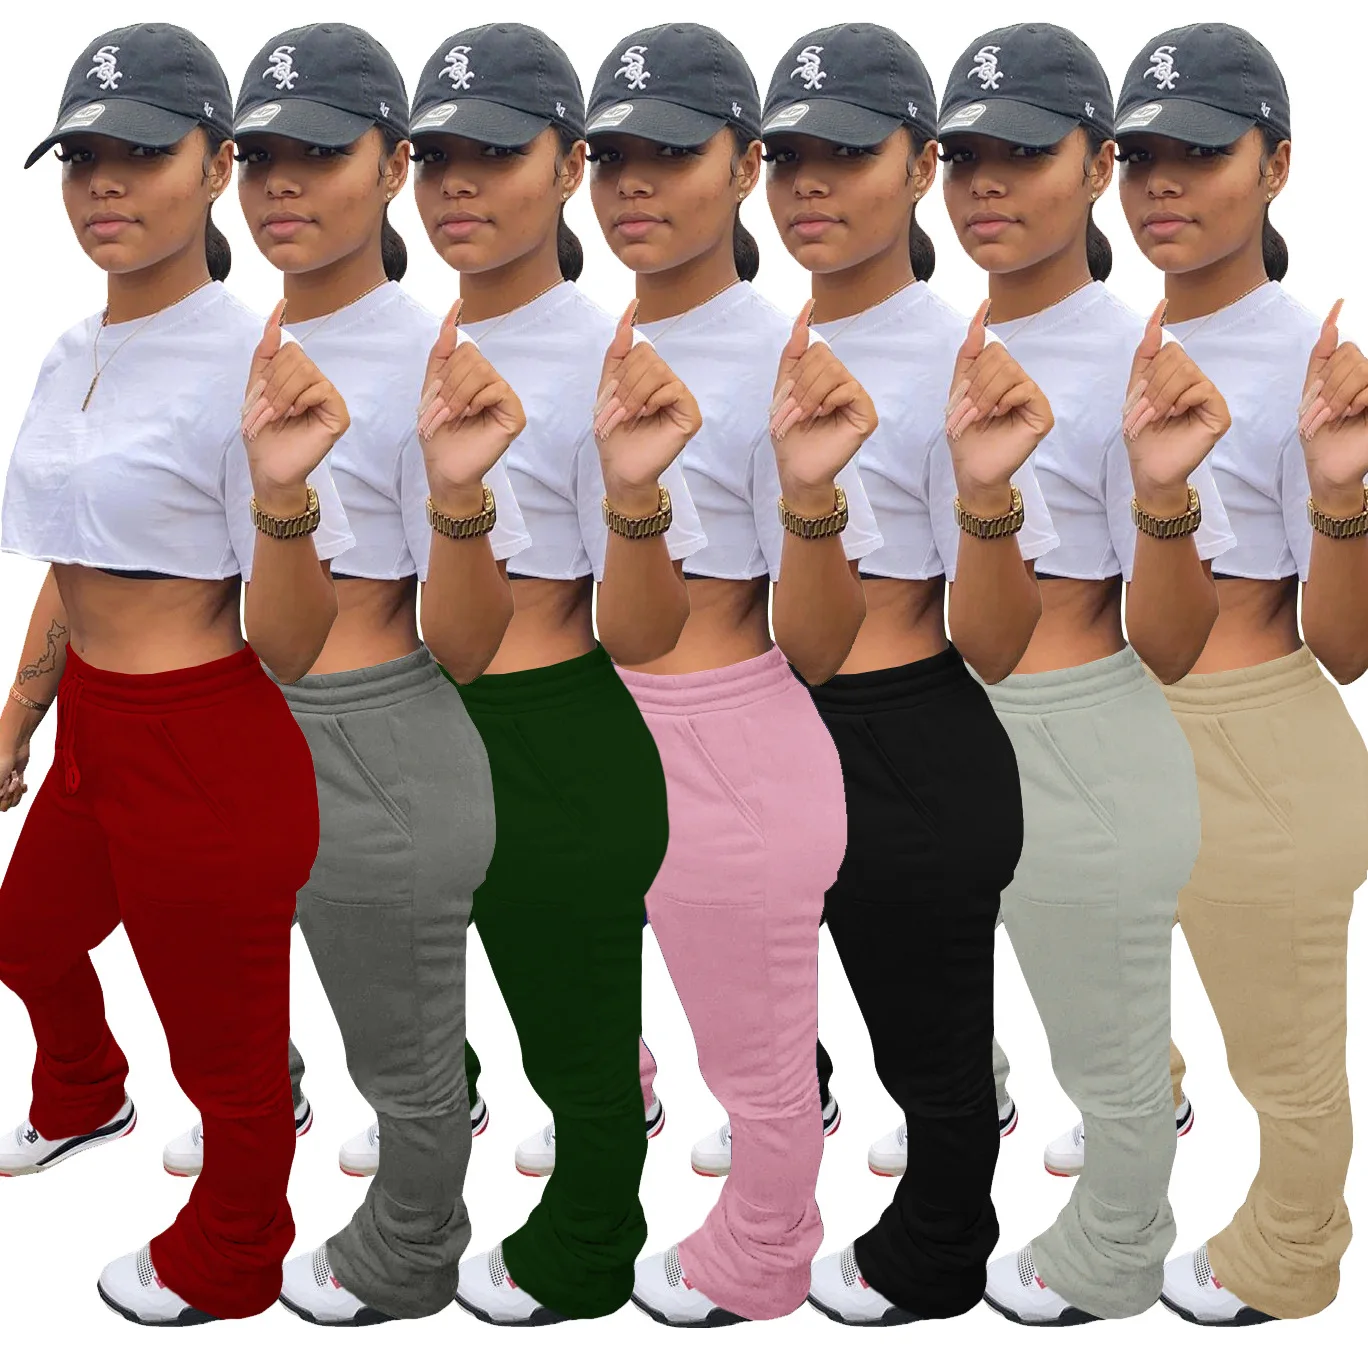 

2020 New arrivals fashion solid color womens stacked pants sets thick leggings women sweat pants, Khaki, red, black, pink, dark gray, light gray, green